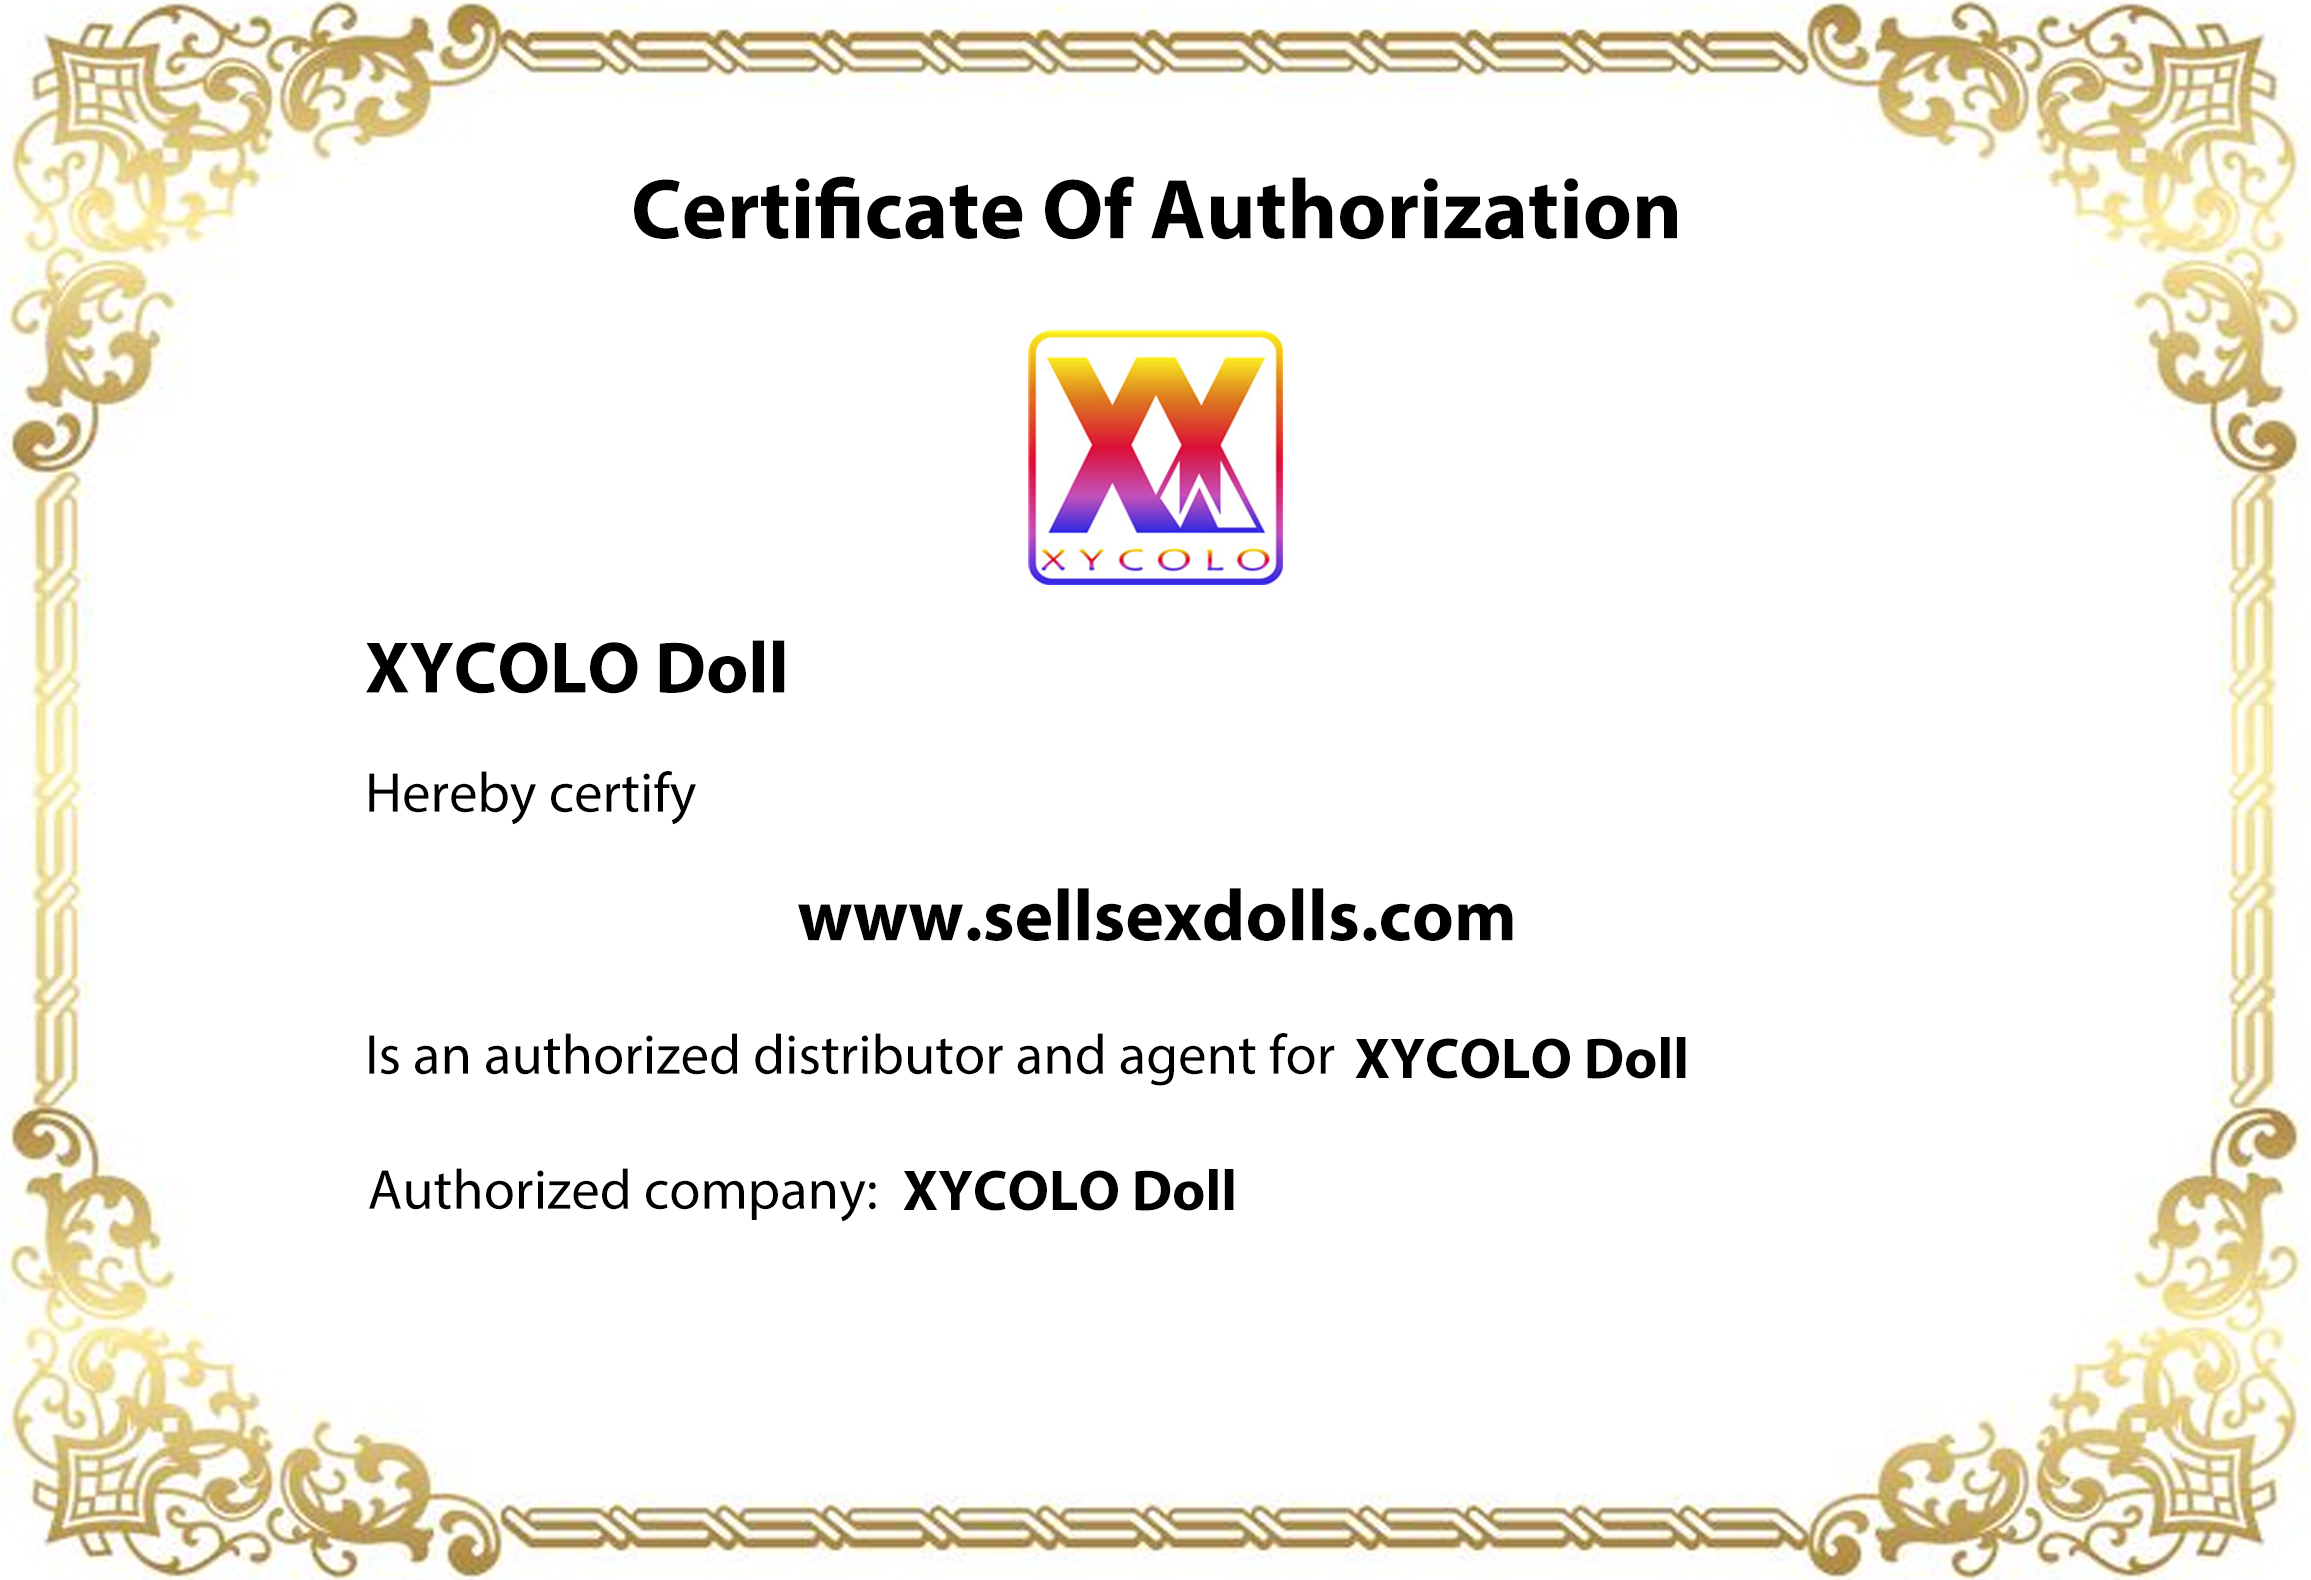 xycolo doll certificate